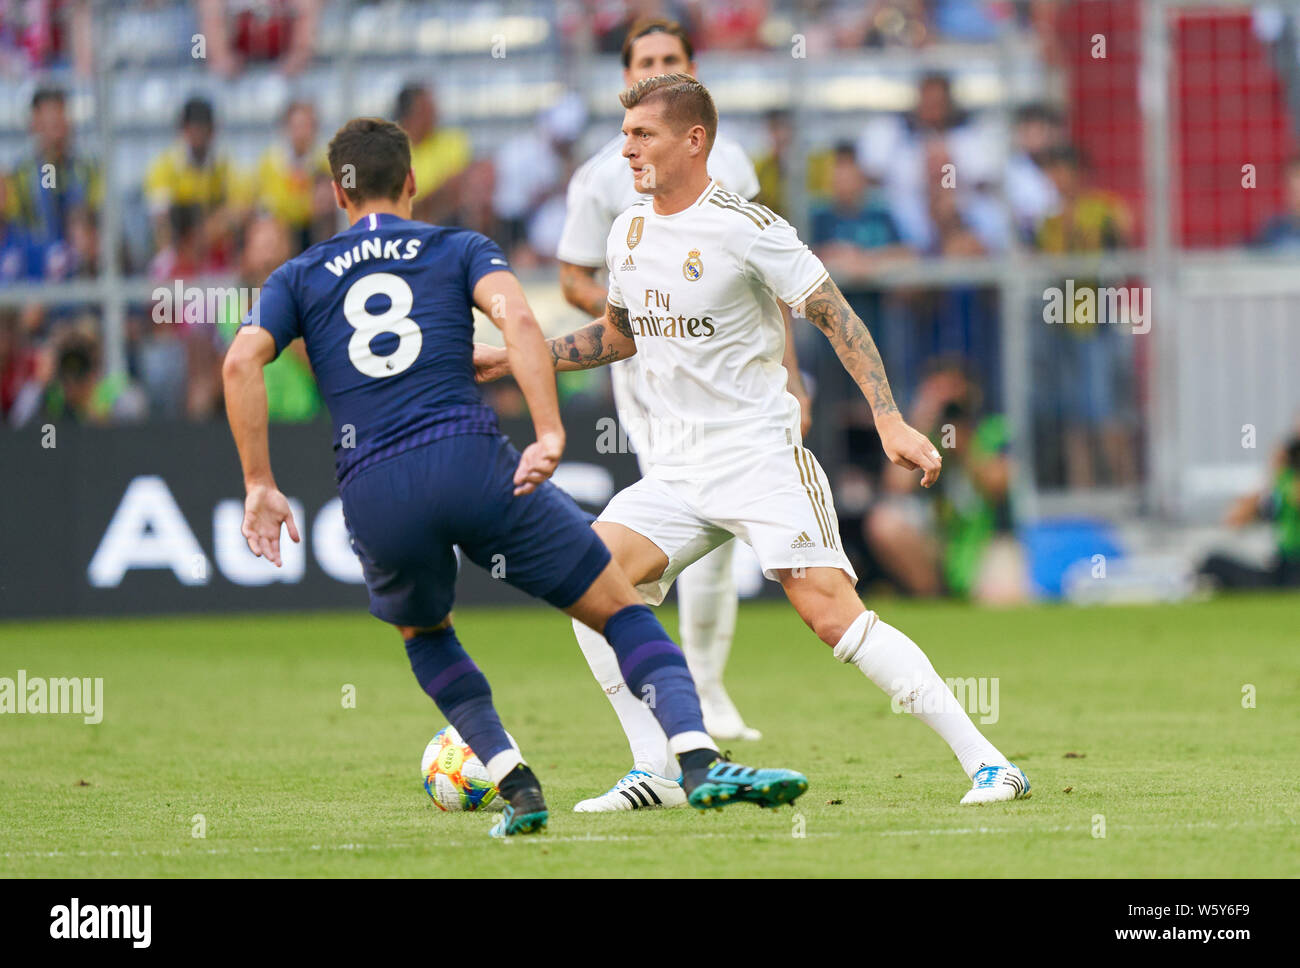 Munich, Germany. 30th July, 2019. Toni KROOS, Real Madrid 8 compete for the ball, tackling, duel, header, zweikampf, action, fight against Harry WINKS, Hotspurs 8 REAL MADRID - TOTTENHAM HOTSPURS AUDI CUP 2019, A l l i a n z A r e n a Munich, July 30, 2019 Season 2019/2020, Credit: Peter Schatz/Alamy Live News Stock Photo